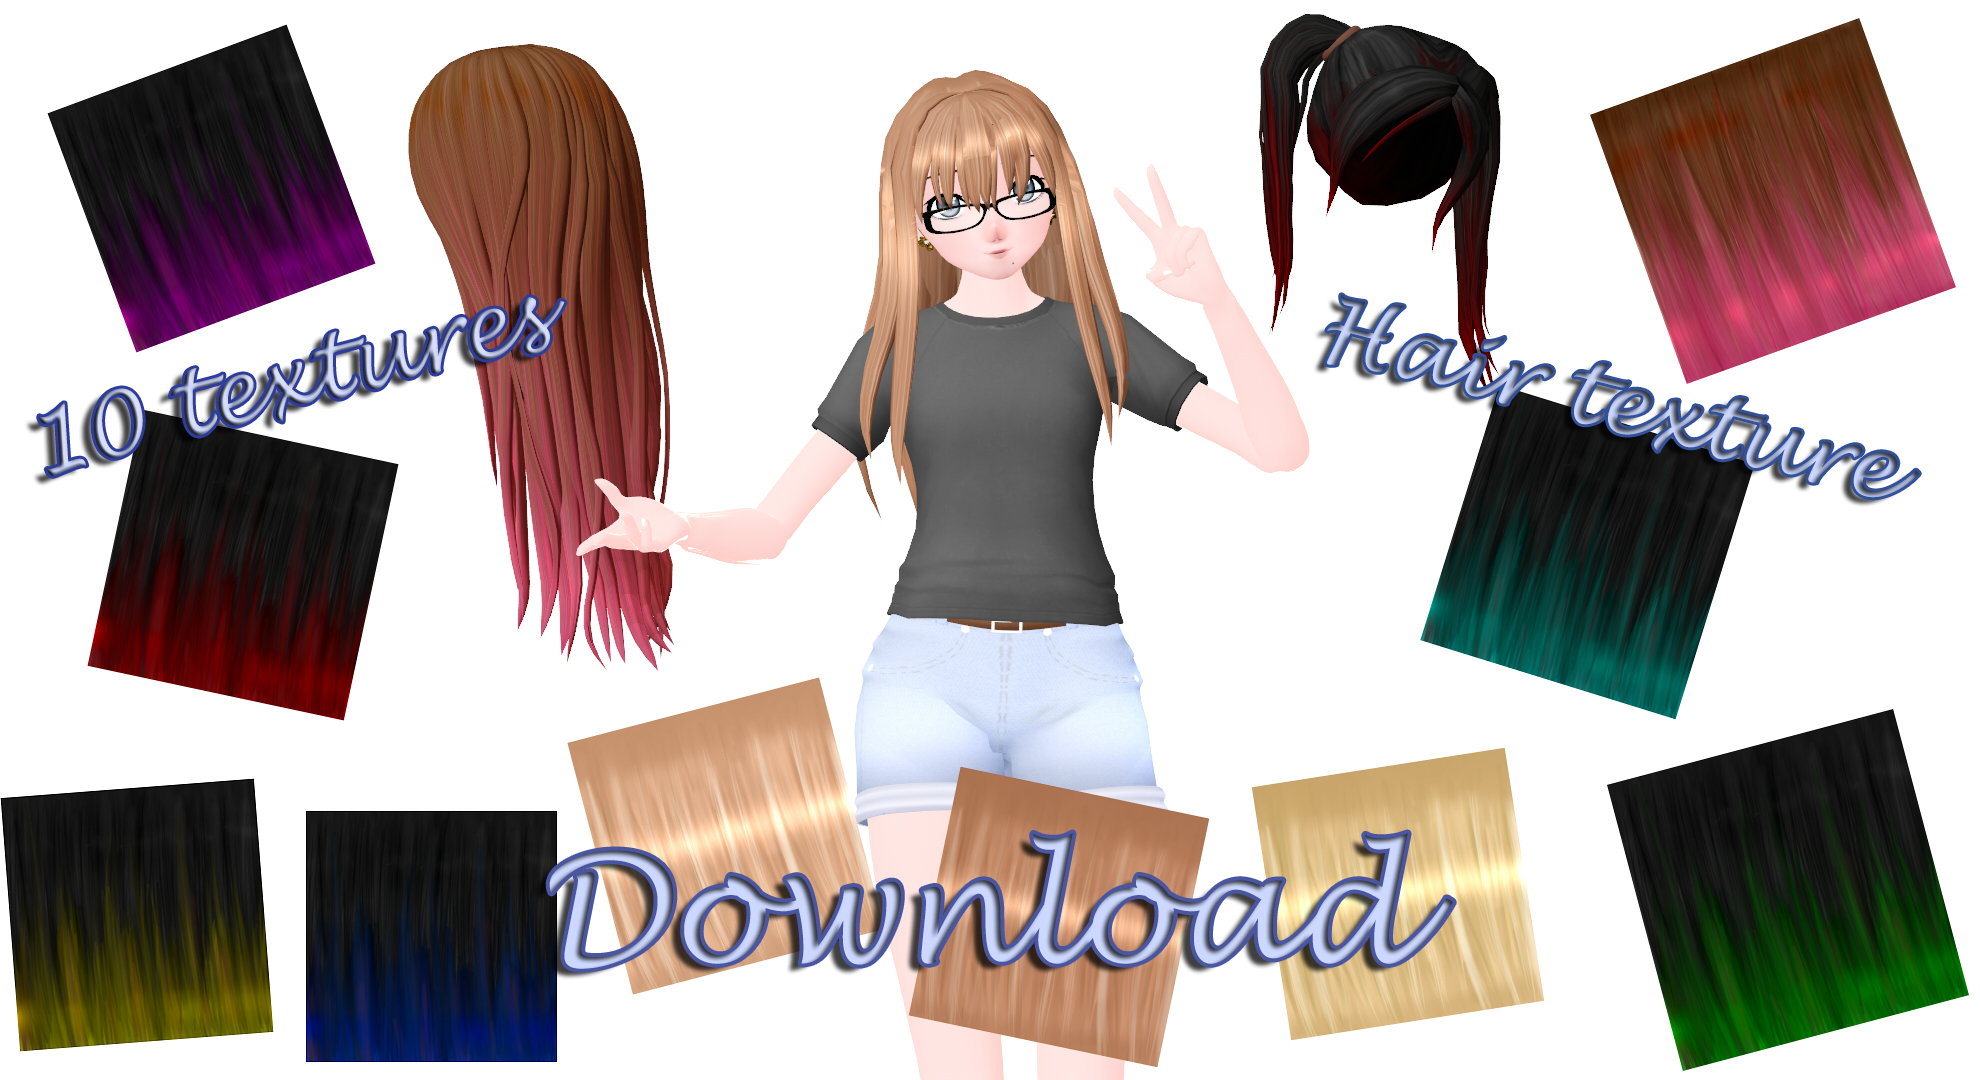 8. MMD Hair Texture Pack Download - wide 10